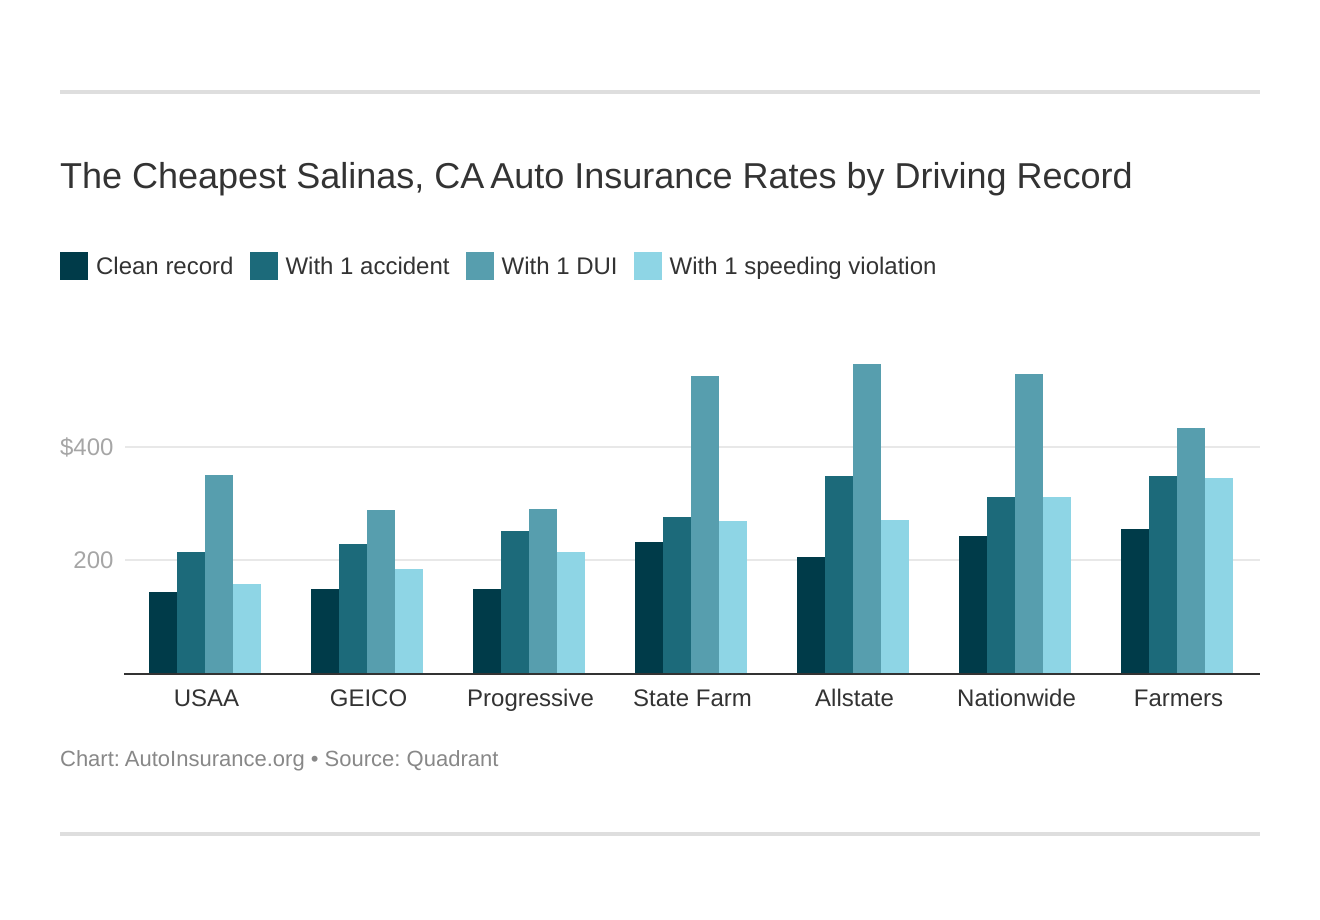 The Cheapest Salinas, CA Auto Insurance Rates by Driving Record